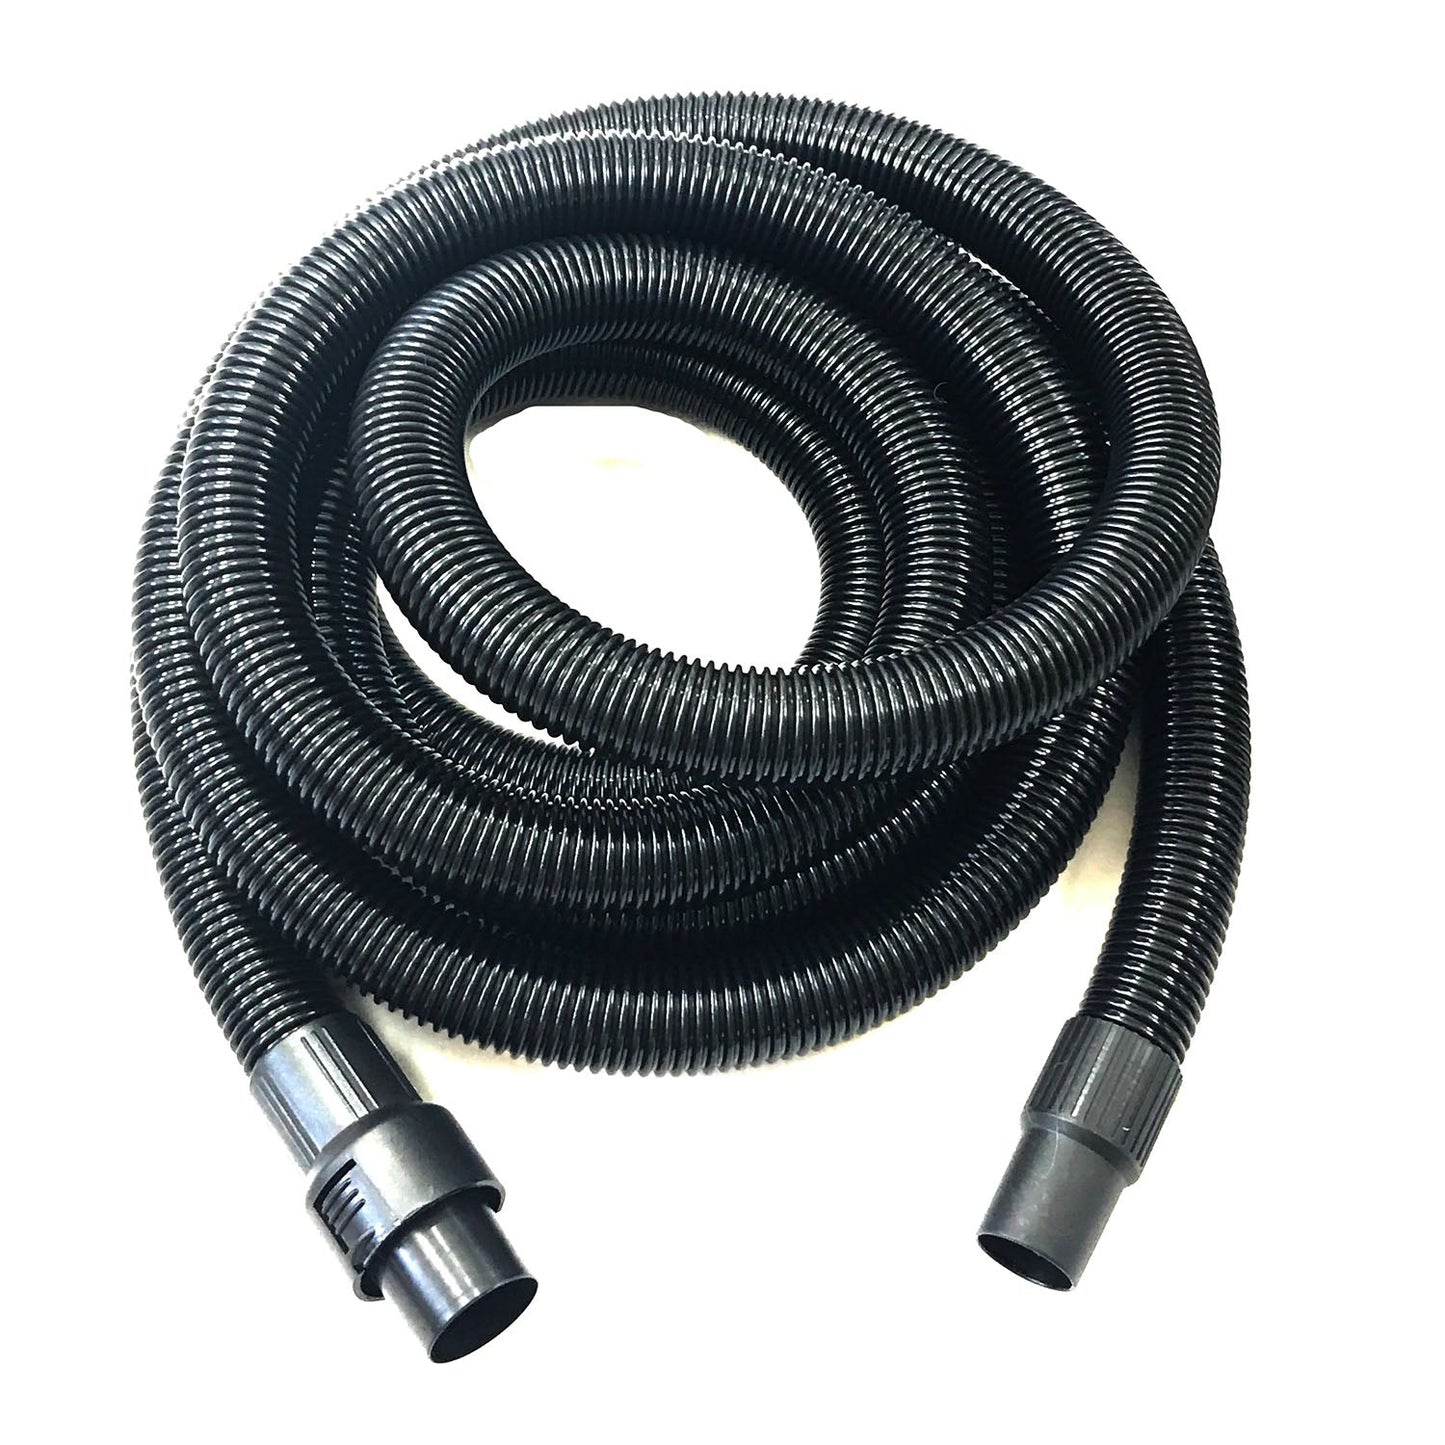 20 Gallon Classic Cyclone Gutter Vacuum, 40 Foot Carbon Clamping Gutter Poles, Pole Carry Bag and 25ft Hose